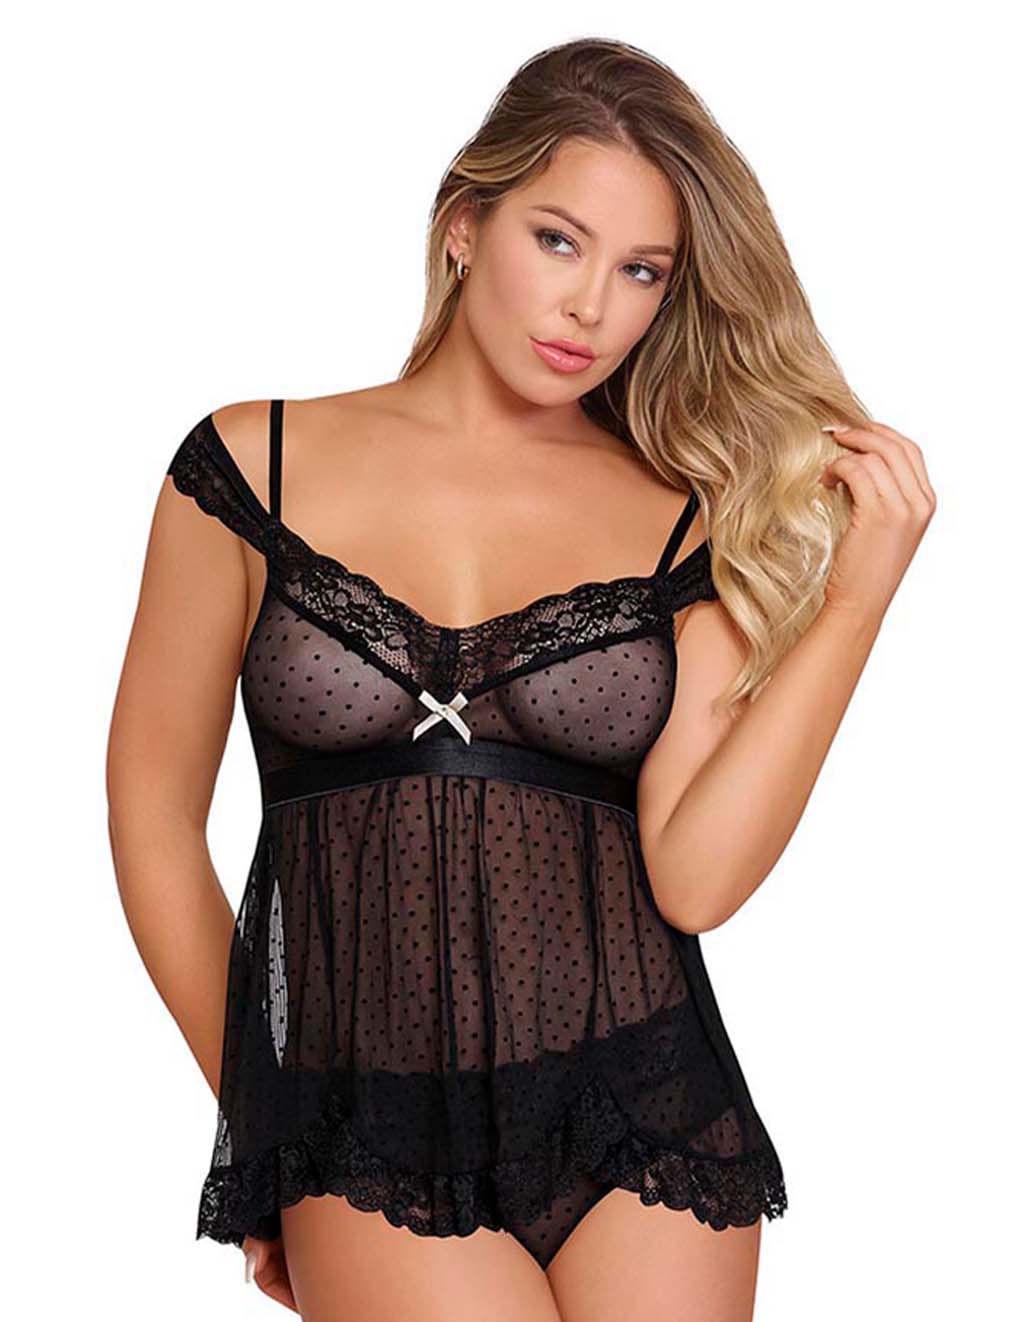 Exposed Passion Pointe Babydoll Set- Front